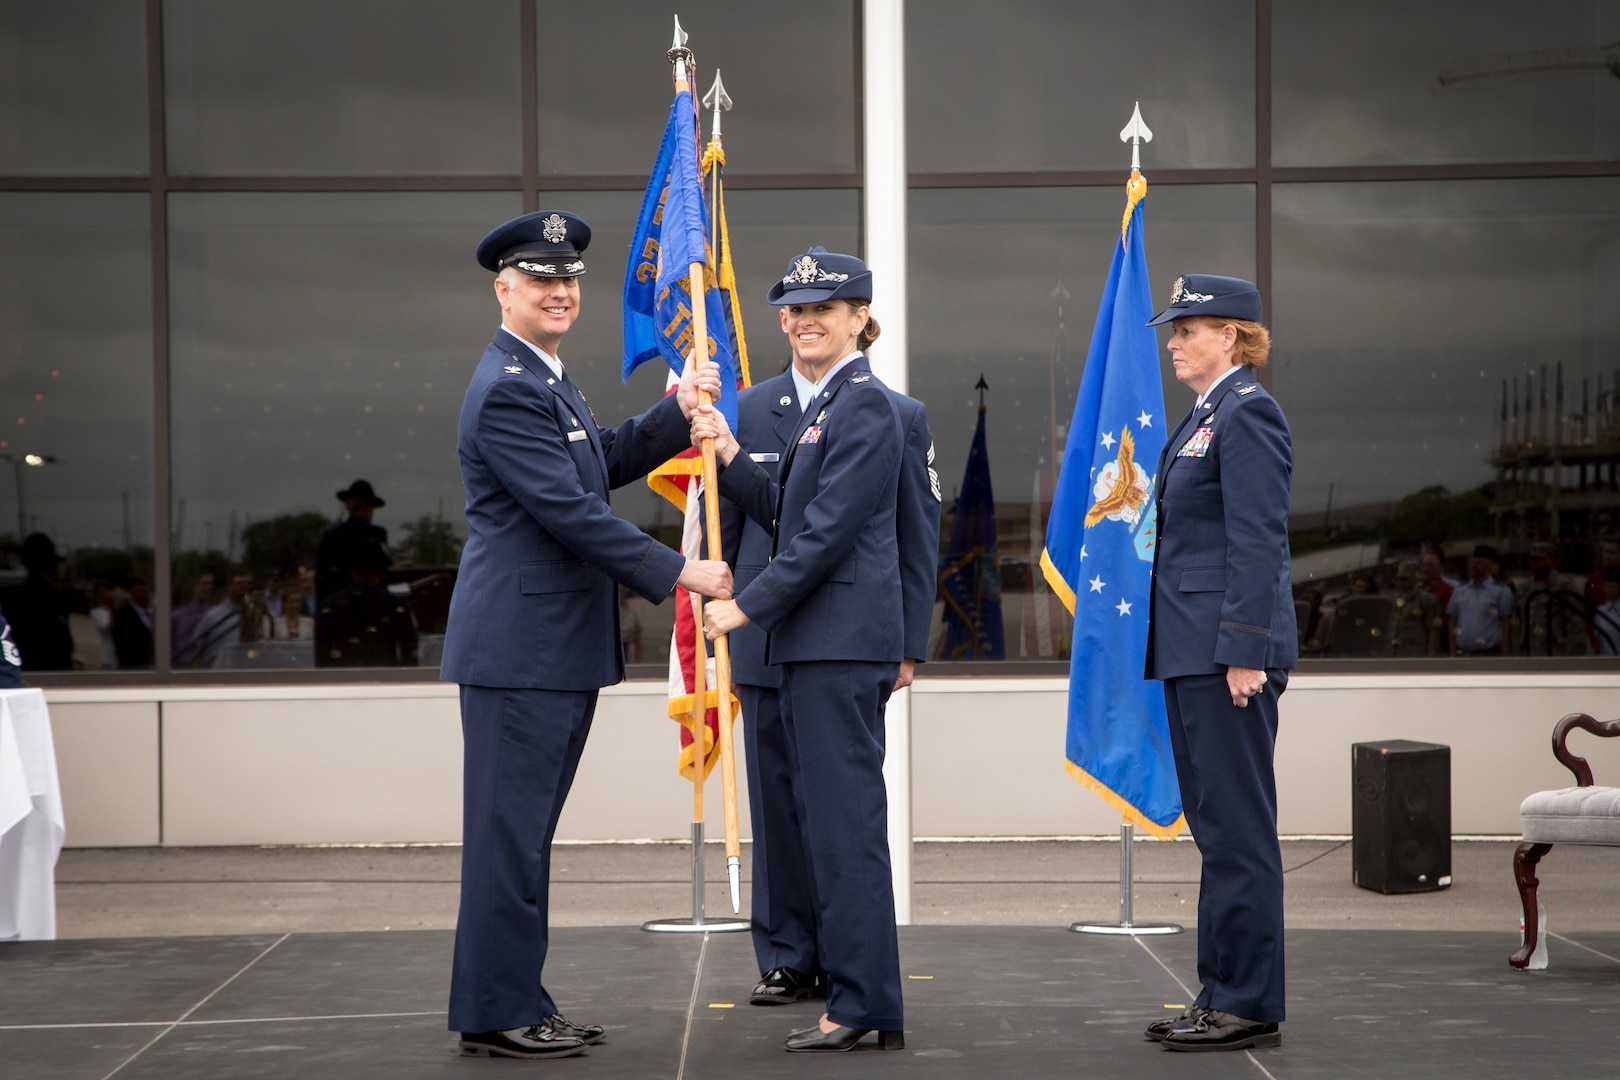 Col. Mark Camerer (left), 37th Training Wing commander, passes the 737th Training
Group guidon to Col. Michele Edmondson during a change of command ceremony Monday. Edmondson replaces Col. Deborah Liddick (right) as BMT commander. (U.S. Air Force Photo by Joshua Rodriguez)